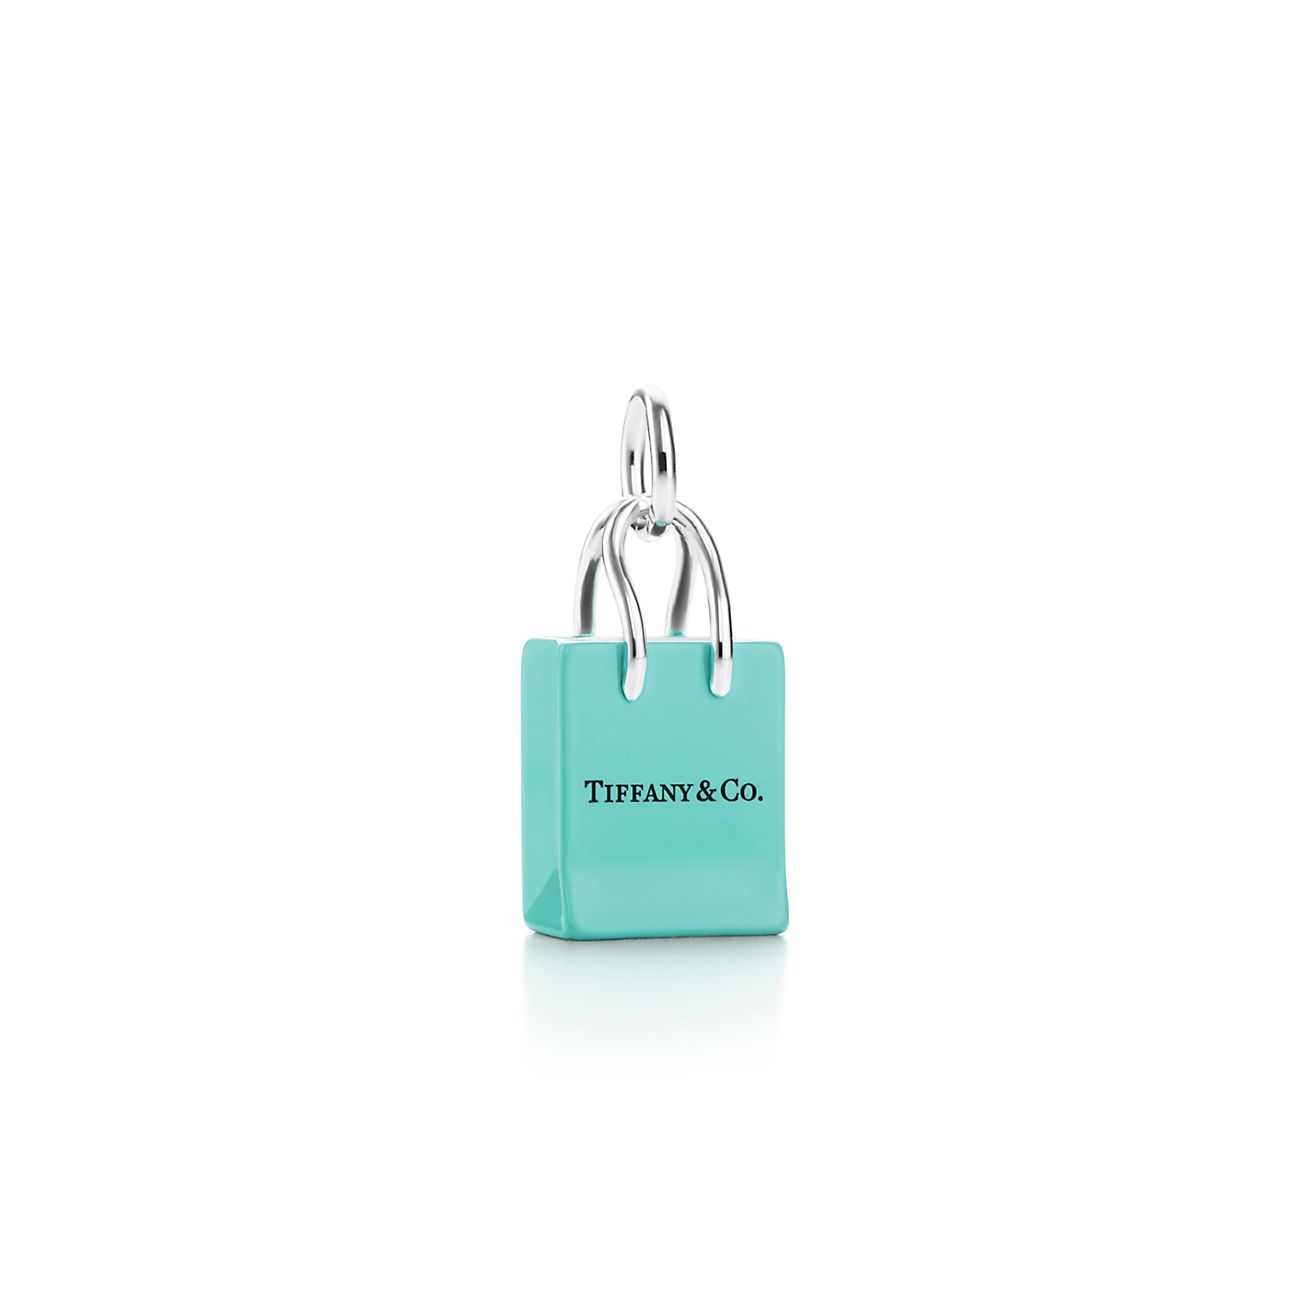 Tiffany & Co.® Shopping Bag Charm In Sterling Silver With Enamel Finish. |  Tiffany & Co.